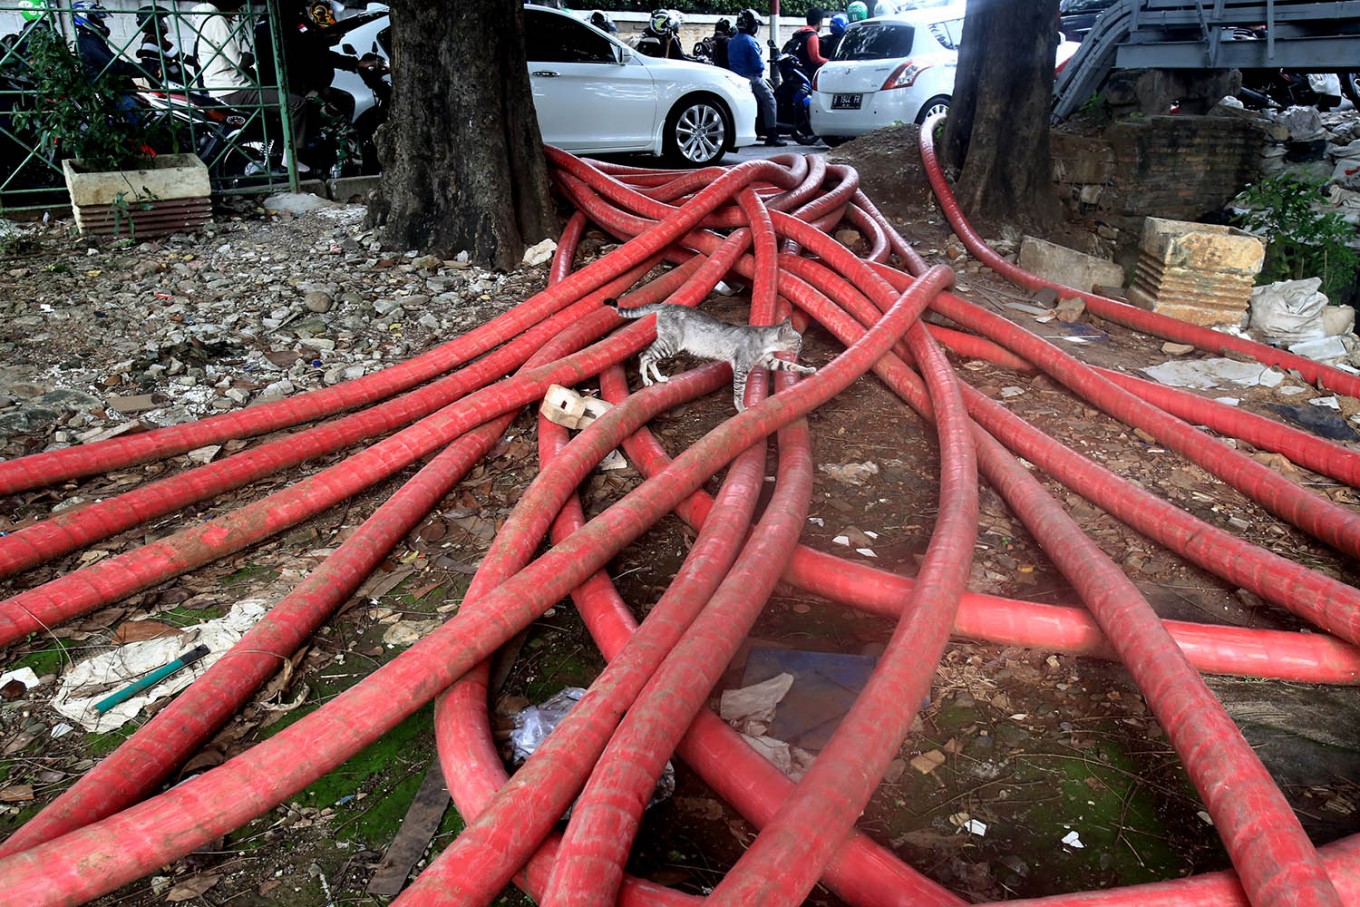 Jakarta's cable emergency